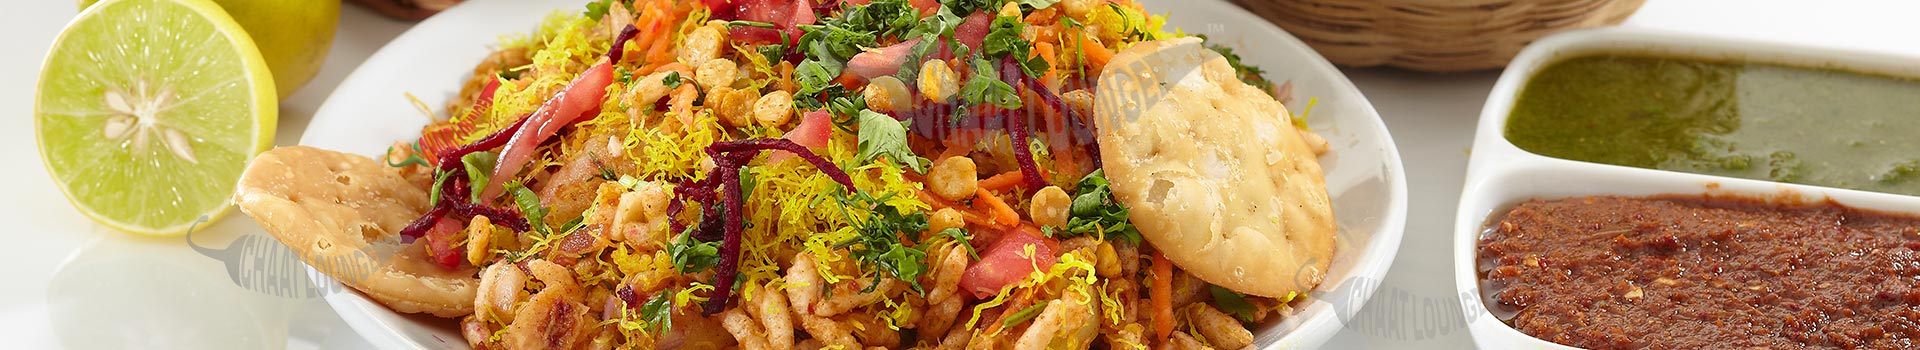 Chaat Franchise Outlets, Chaat Lounge Franchise In India, Chaat Lounge Franchise Company